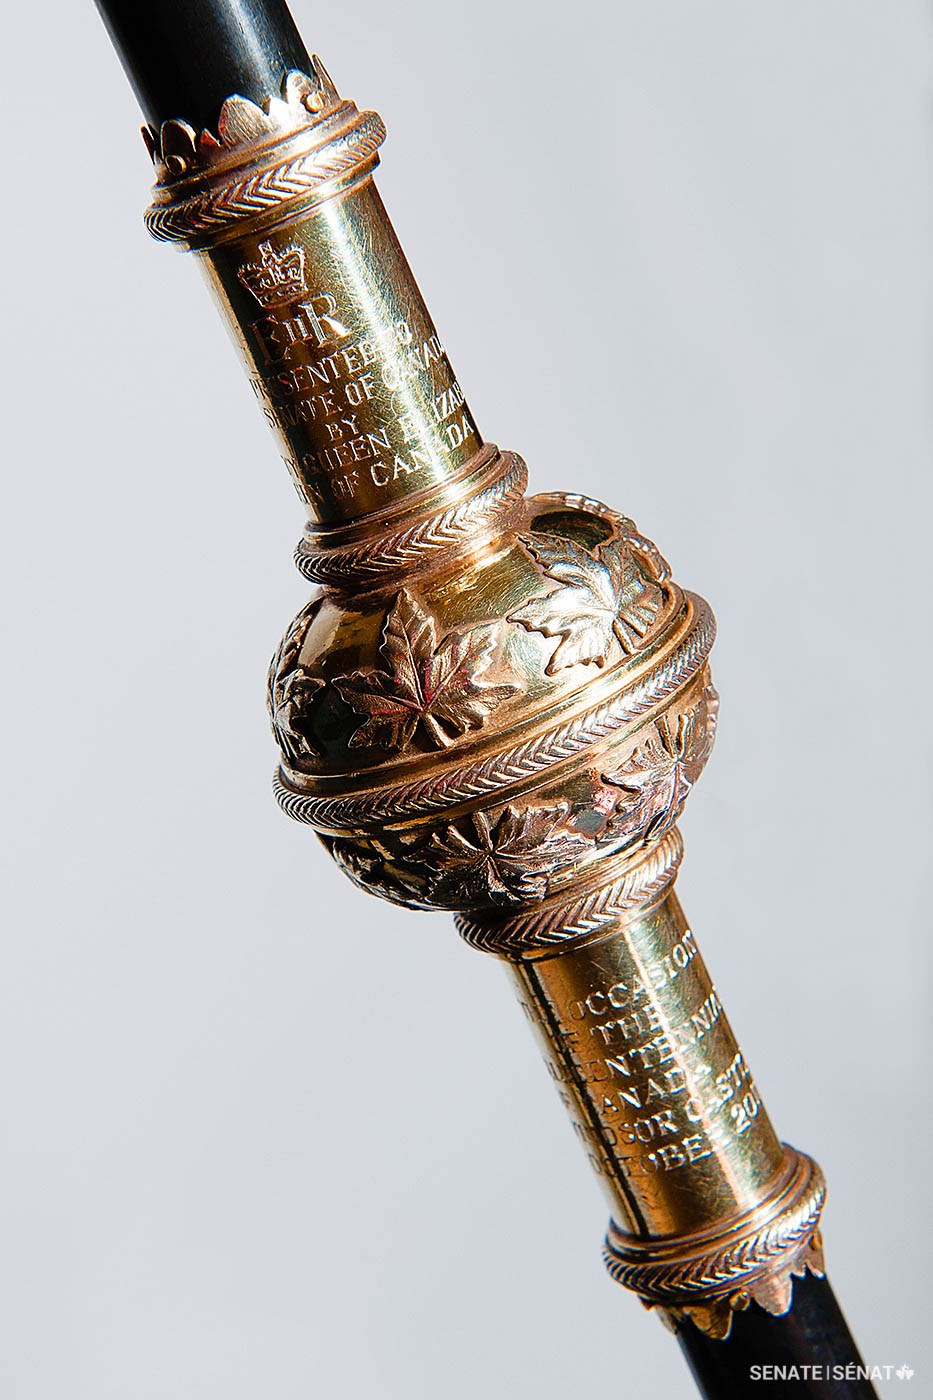 Windsor Castle artisans restored the Black Rod in 2016, adding Queen Elizabeth’s royal cypher above the middle knop.